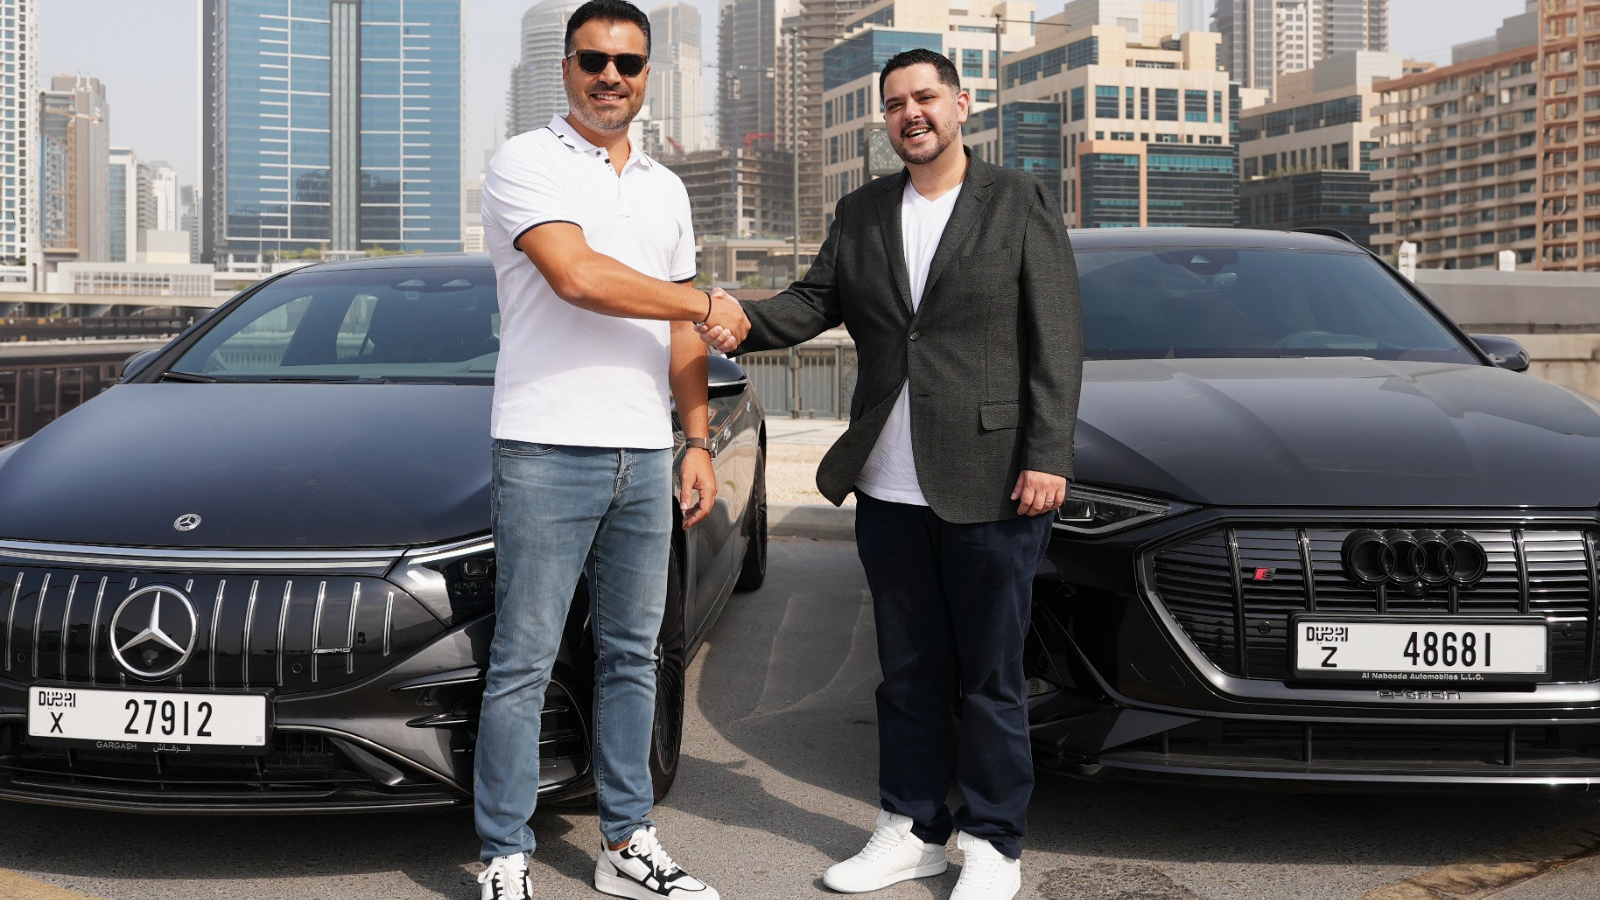 https://adgully.me/post/3092/qashio-and-carasti-join-forces-to-transform-leasing-and-corporate-expense-in-uae